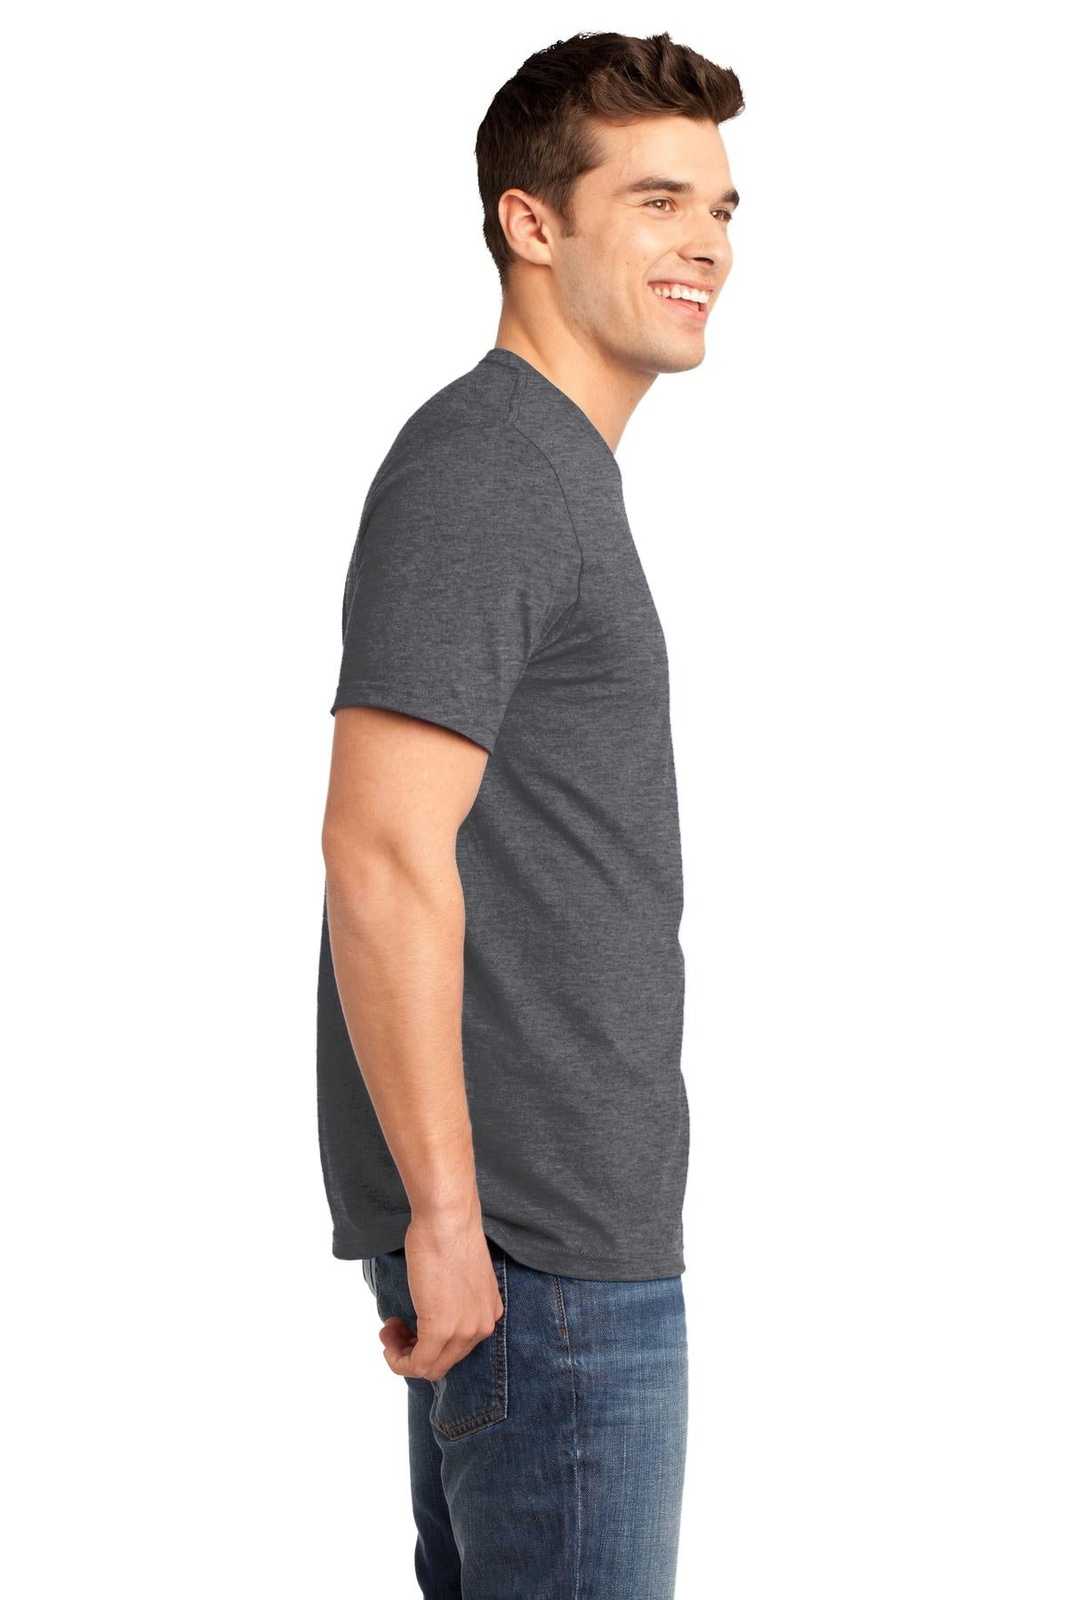 District DT6000 Very Important Tee - Heathered Charcoal - HIT a Double - 3